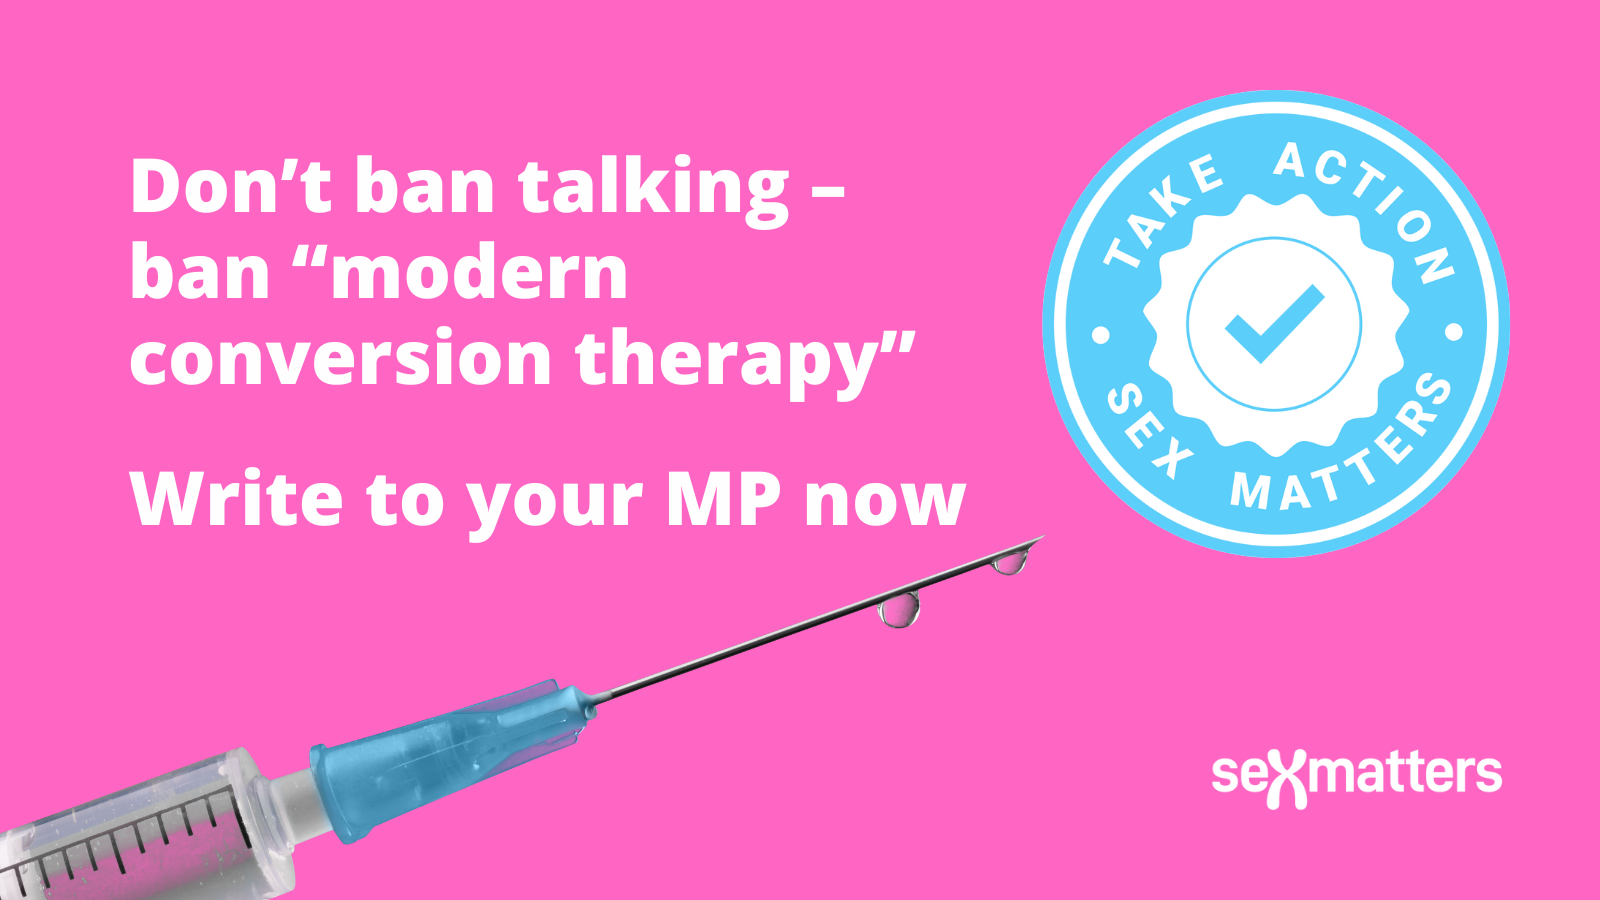 Don’t ban talking – ban “modern conversion therapy” Write to your MP